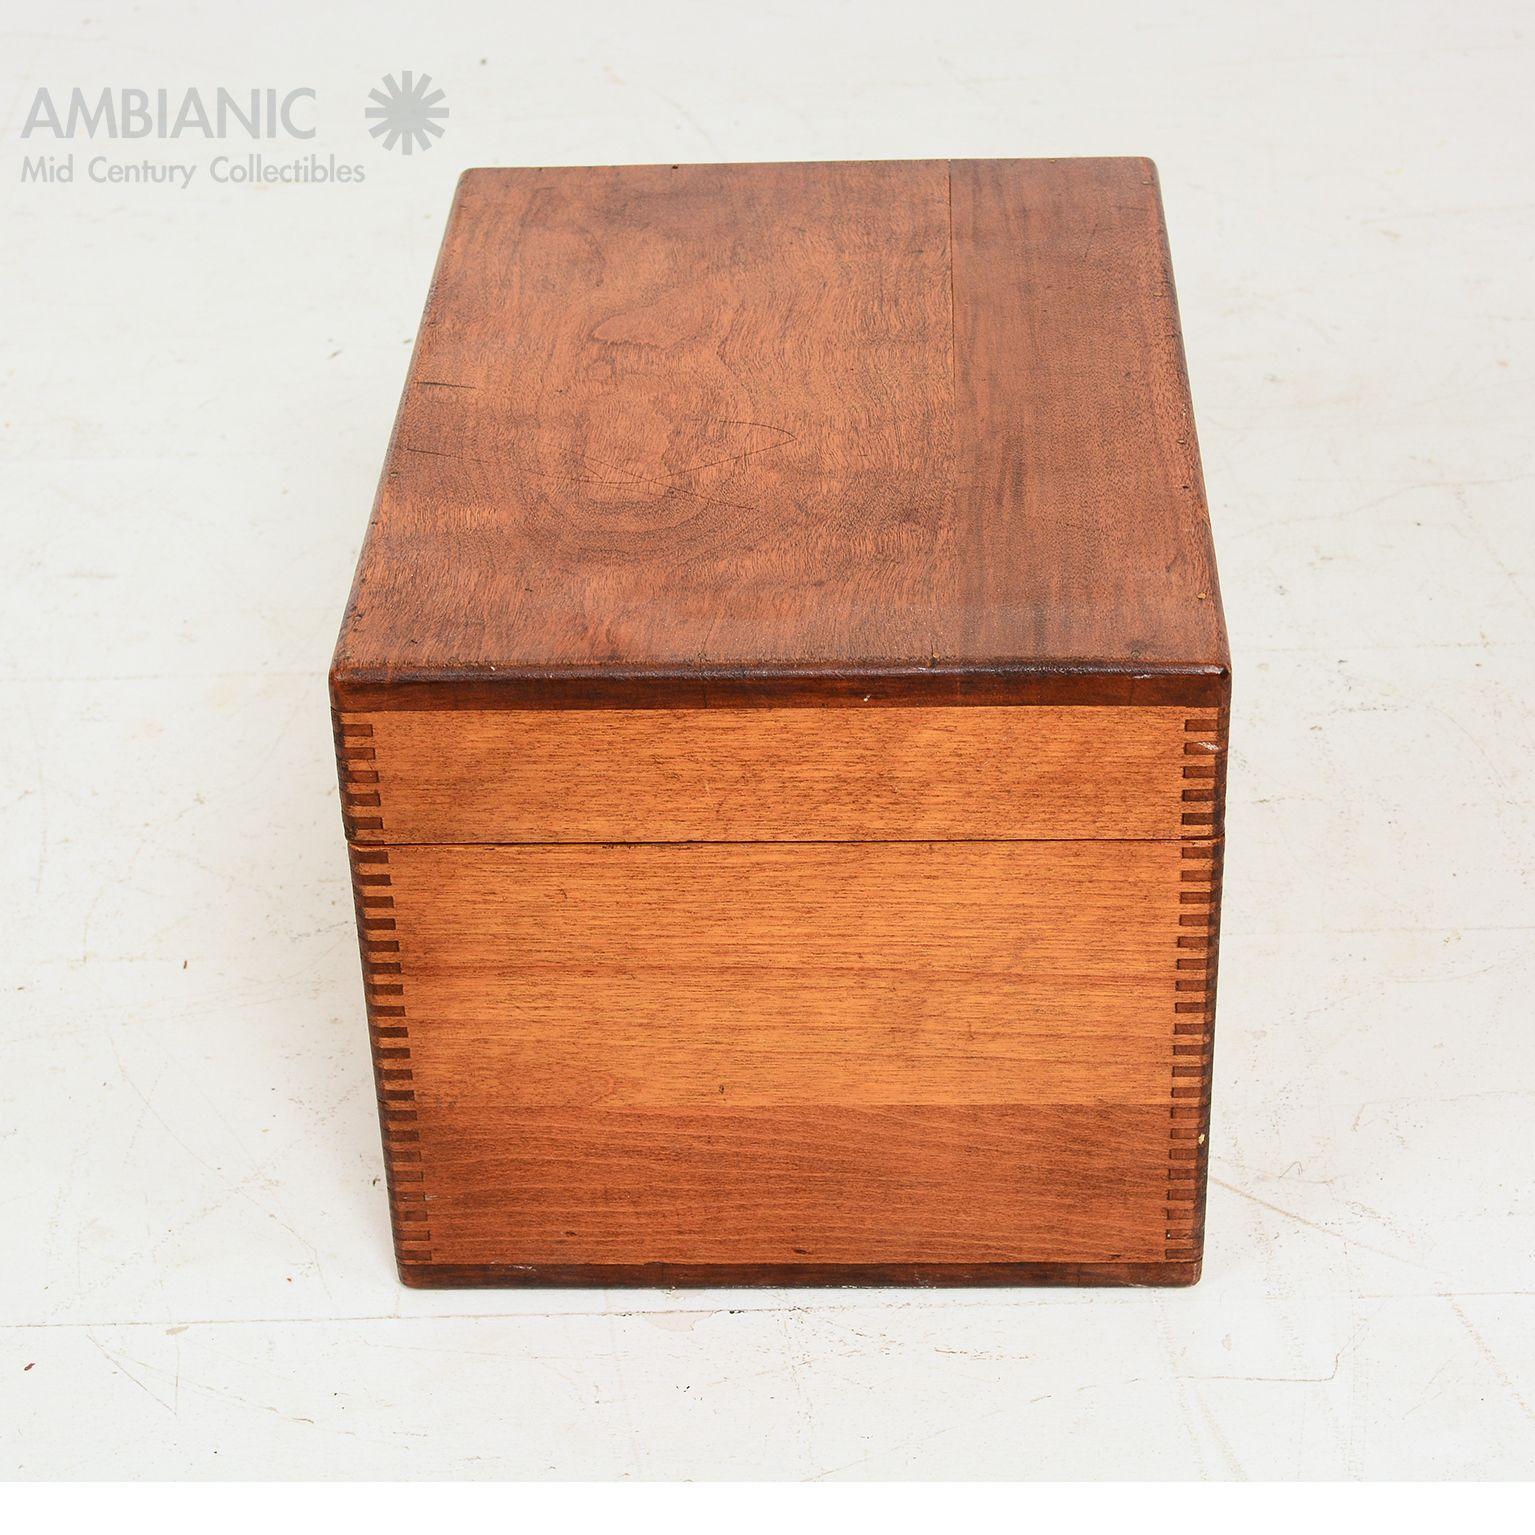 North American Antique Solid Maple Wood Box Money Coin Compartments Cash Storage Drawer 1920s